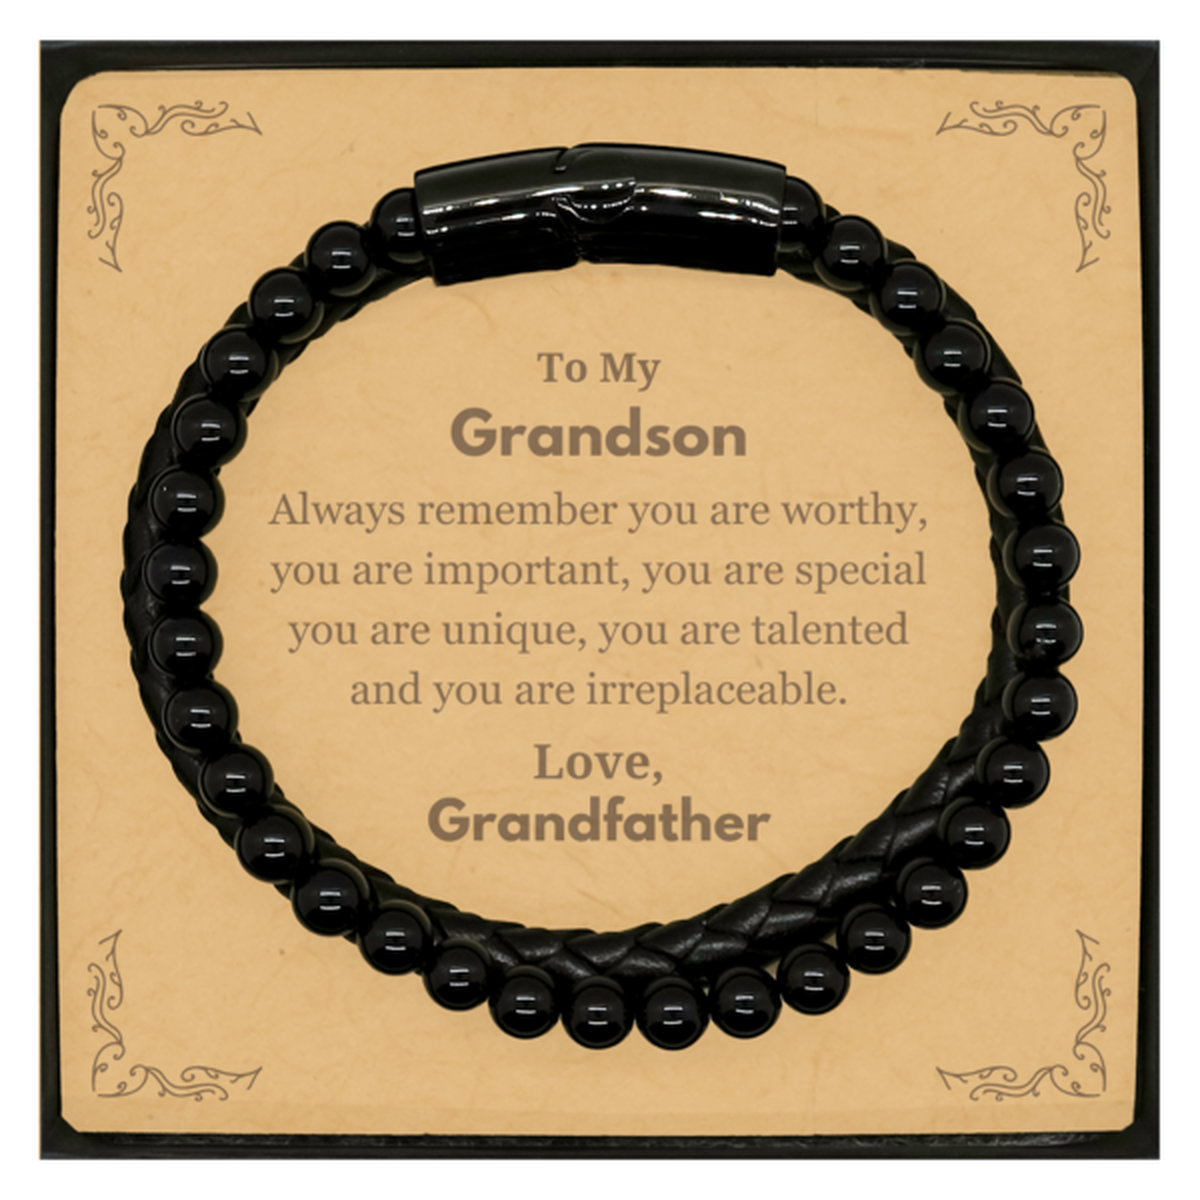 Grandson Birthday Gifts from Grandfather, Inspirational Stone Leather Bracelets for Grandson Christmas Graduation Gifts for Grandson Always remember you are worthy, you are important. Love, Grandfather